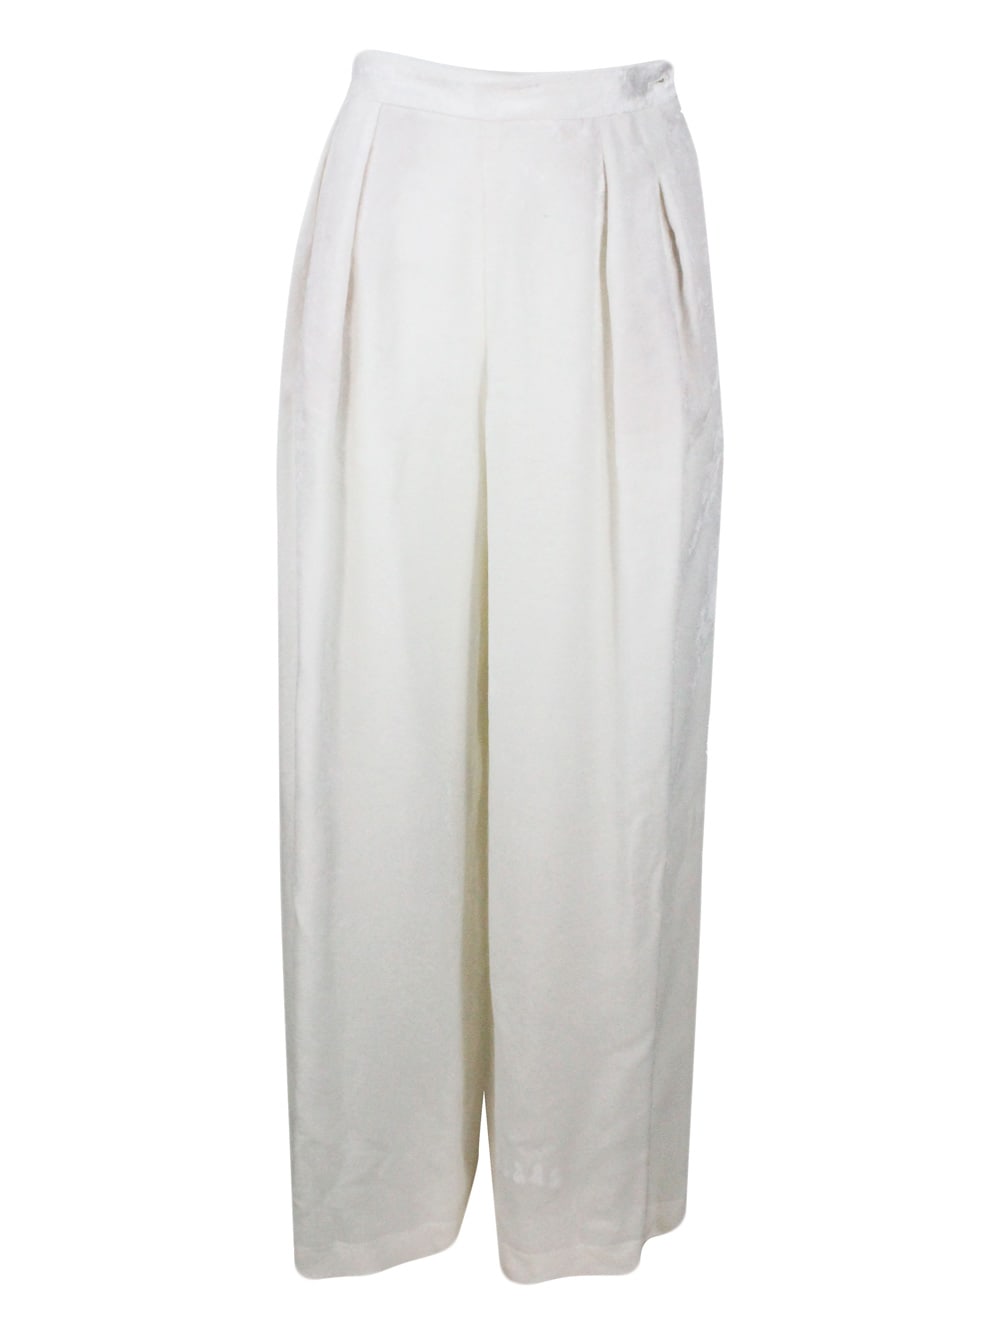 FABIANA FILIPPI WIDE TROUSERS WITH PENCES AND WELT POCKETS IN SOFT VISCOSE AND SIDE ZIP CLOSURE